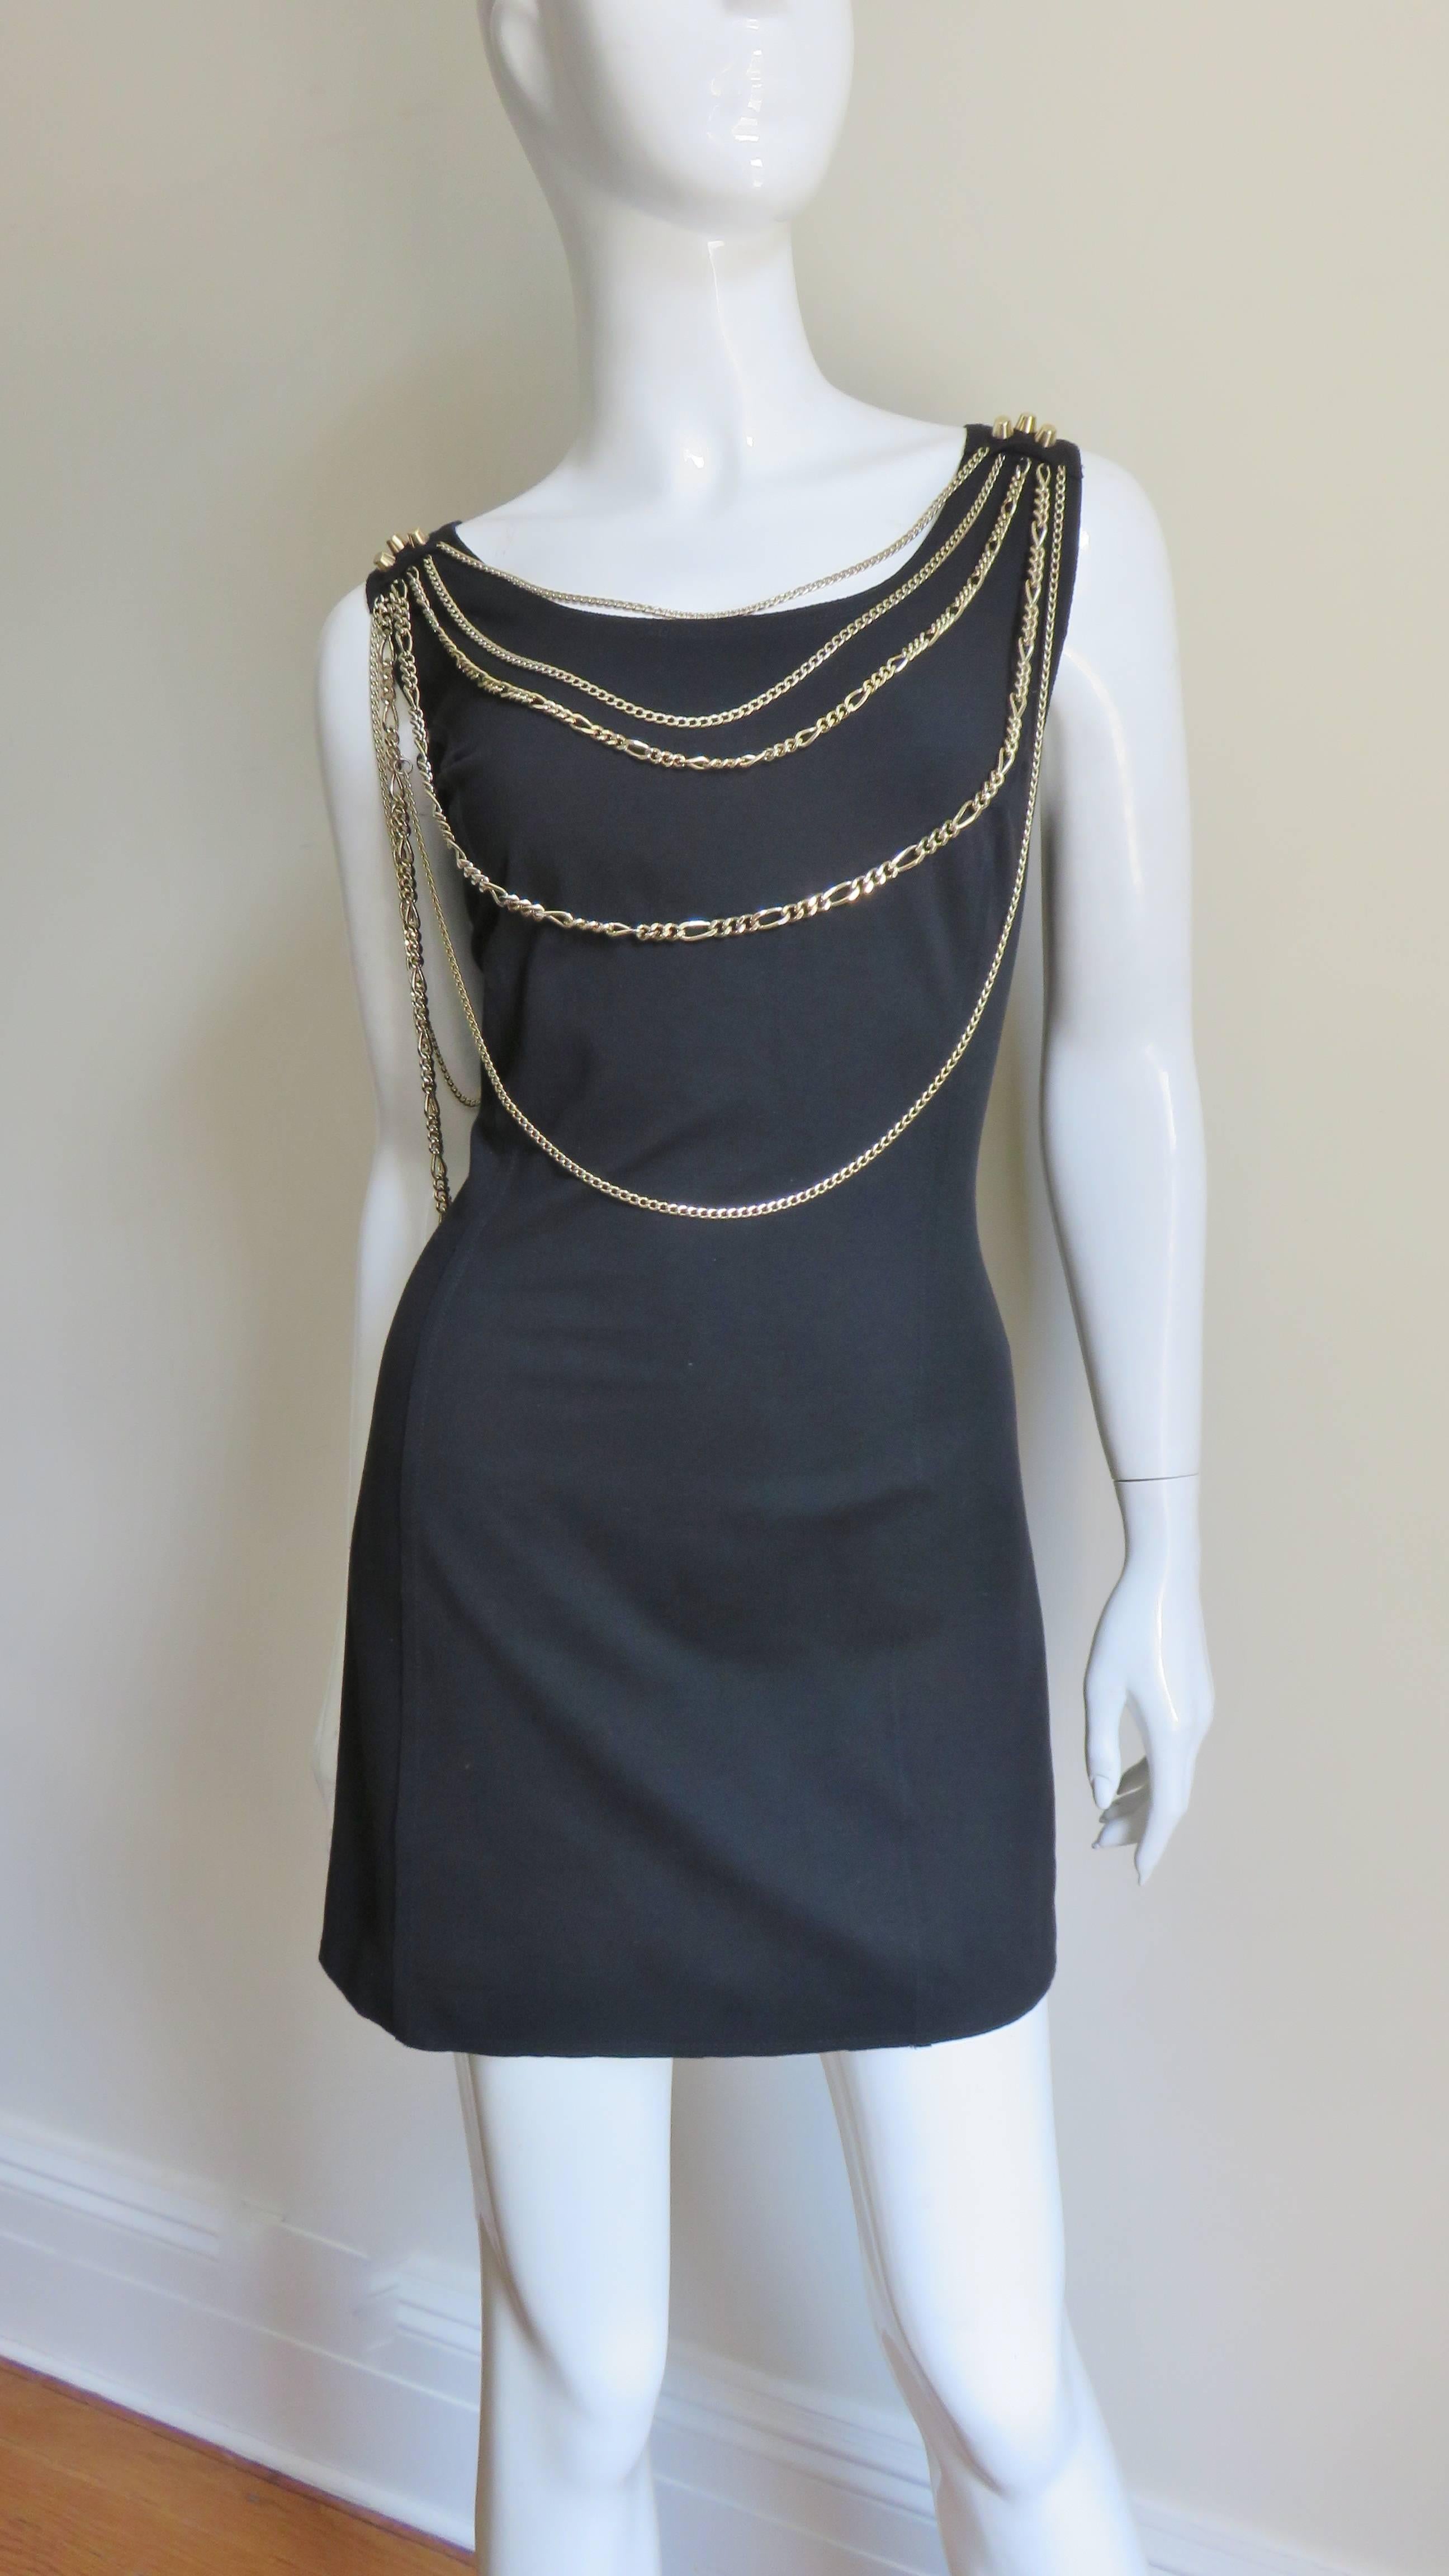 A fabulous black jersey dress from Pierre Balmain.  It is sleeveless with a soup neckline adorned with draping rows of gold chains of varying sizes and lengths all emanating from 3 gold metal posts on each shoulder.  The dress has princess seaming